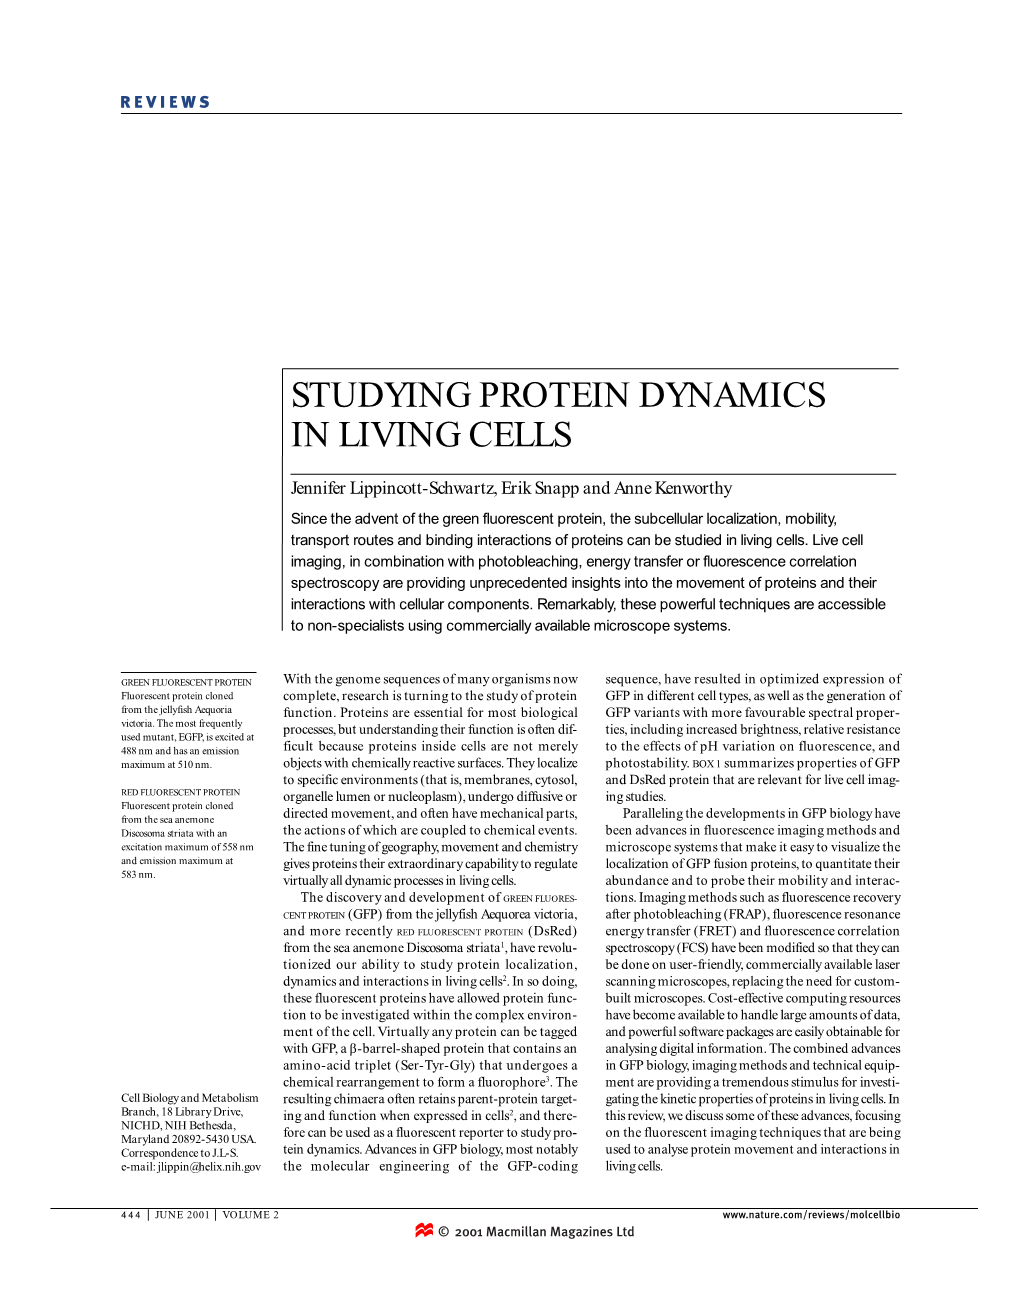 Studying Protein Dynamics in Living Cells